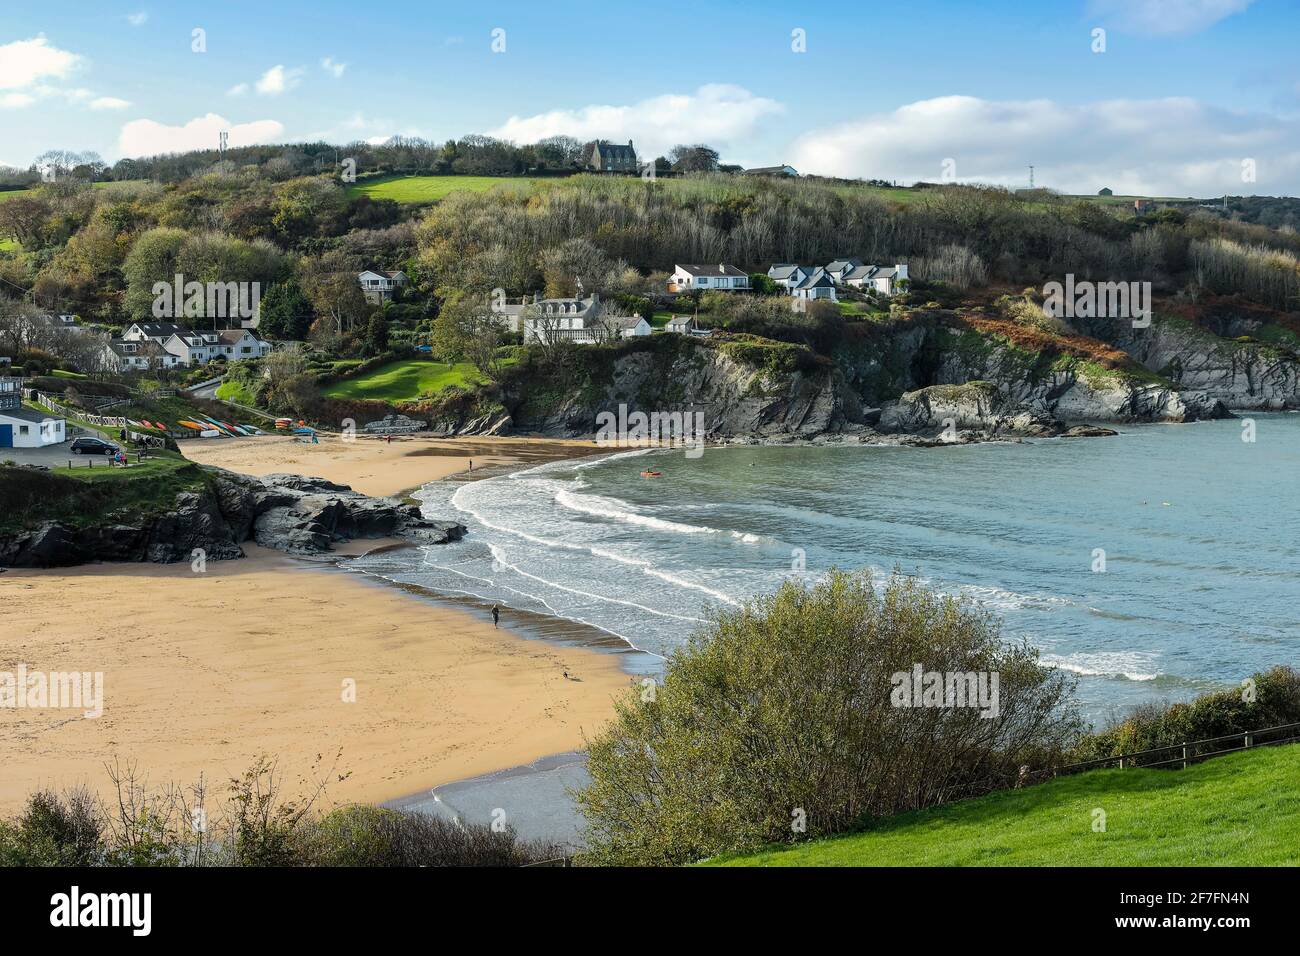 The two town beaches on Aberporth Bay at this small town and former herring fishing harbour, Aberporth, Ceredigion, Wales, United Kingdom, Europe Stock Photo